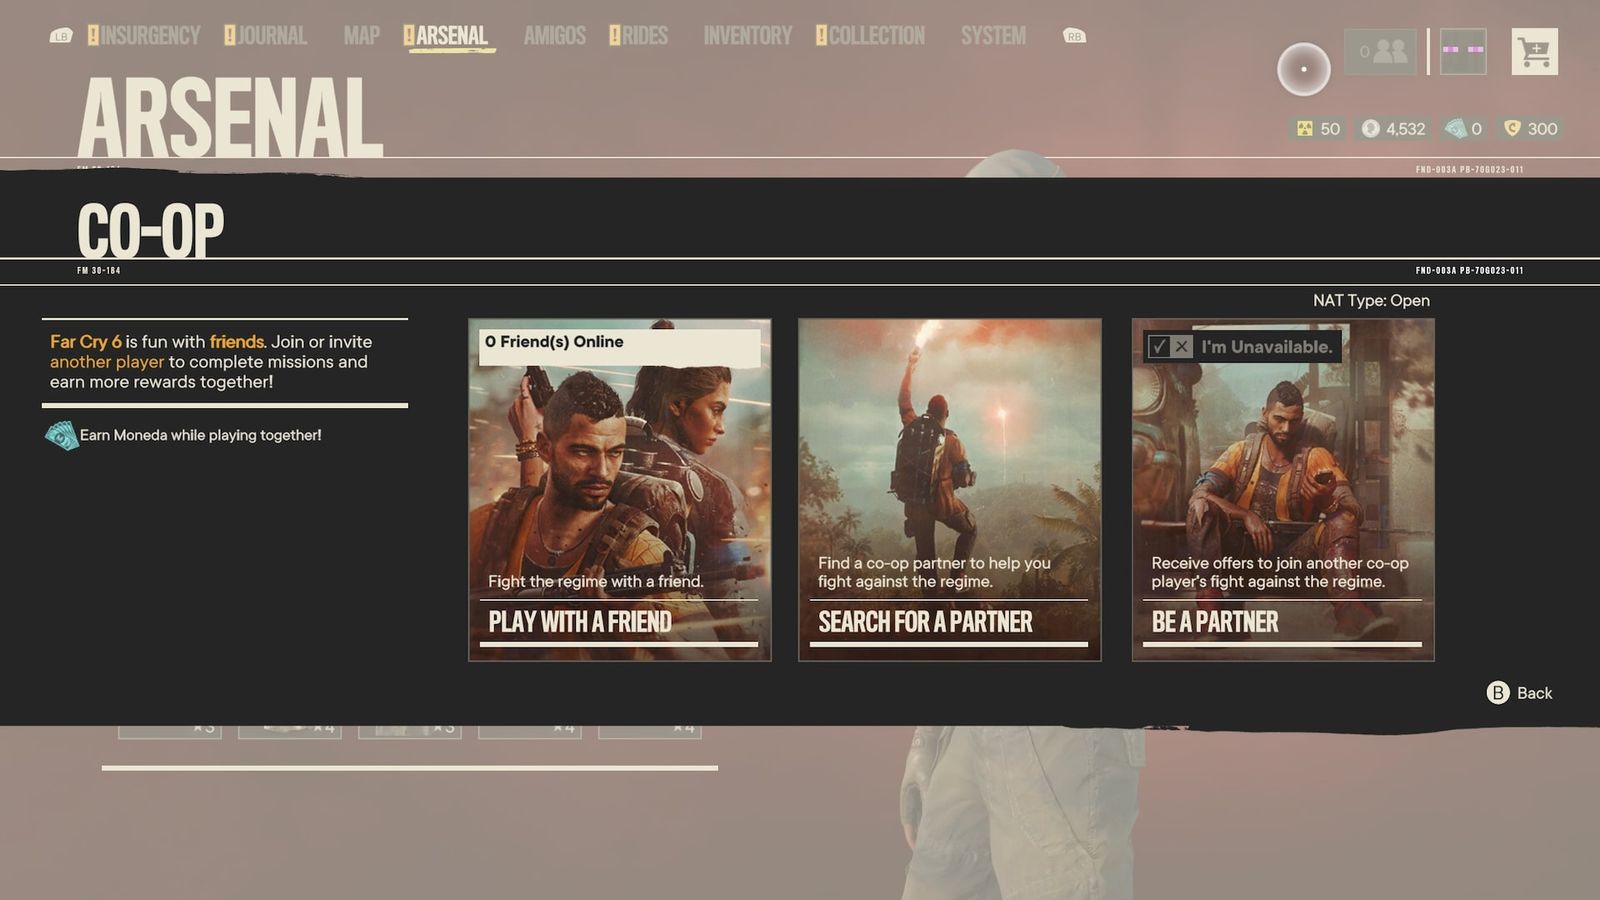 The menu of co-op information and options in Far Cry 6.